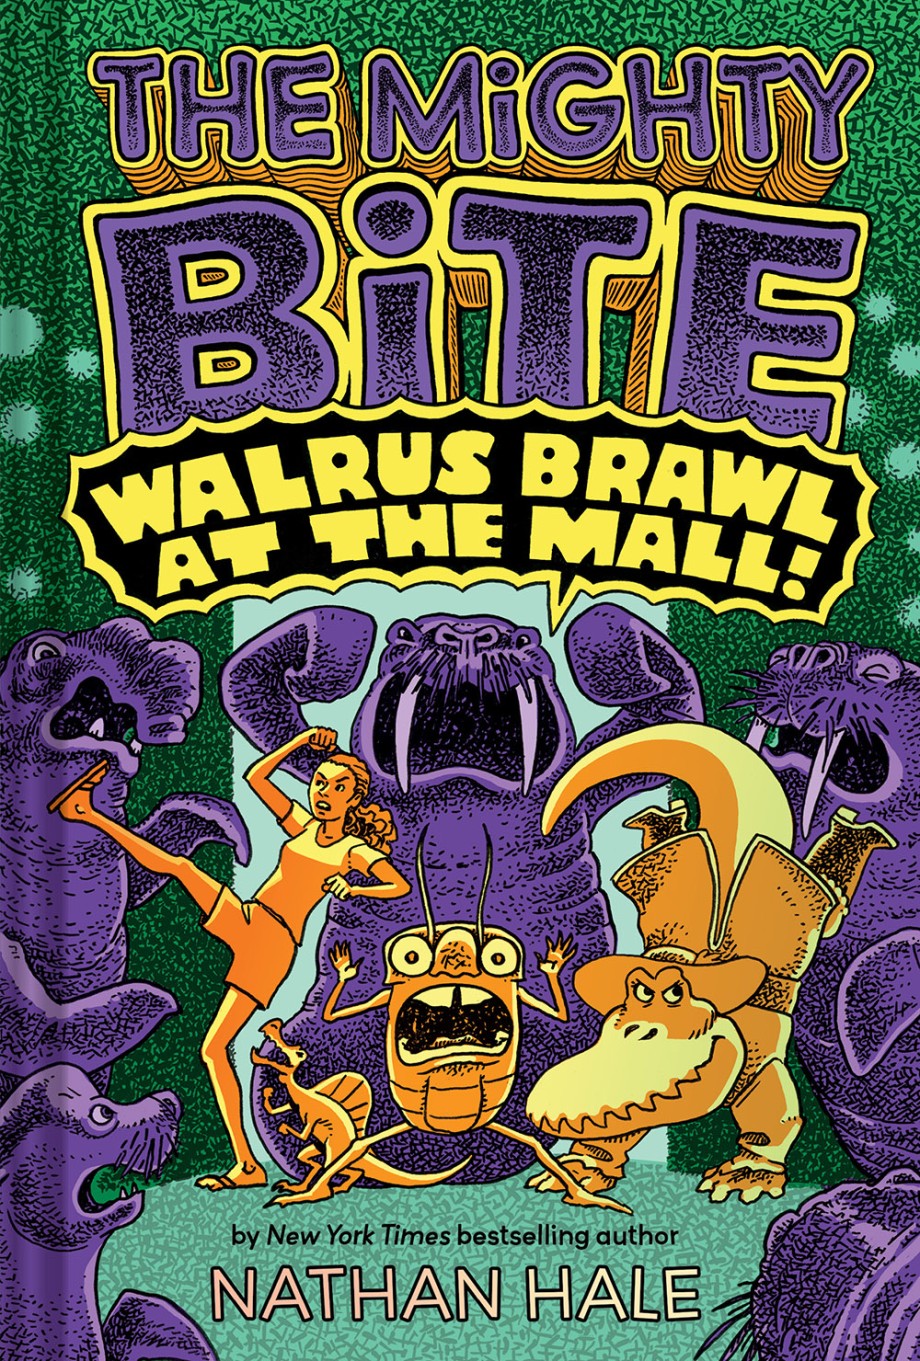 Walrus Brawl at the Mall (The Mighty Bite #2) A Graphic Novel